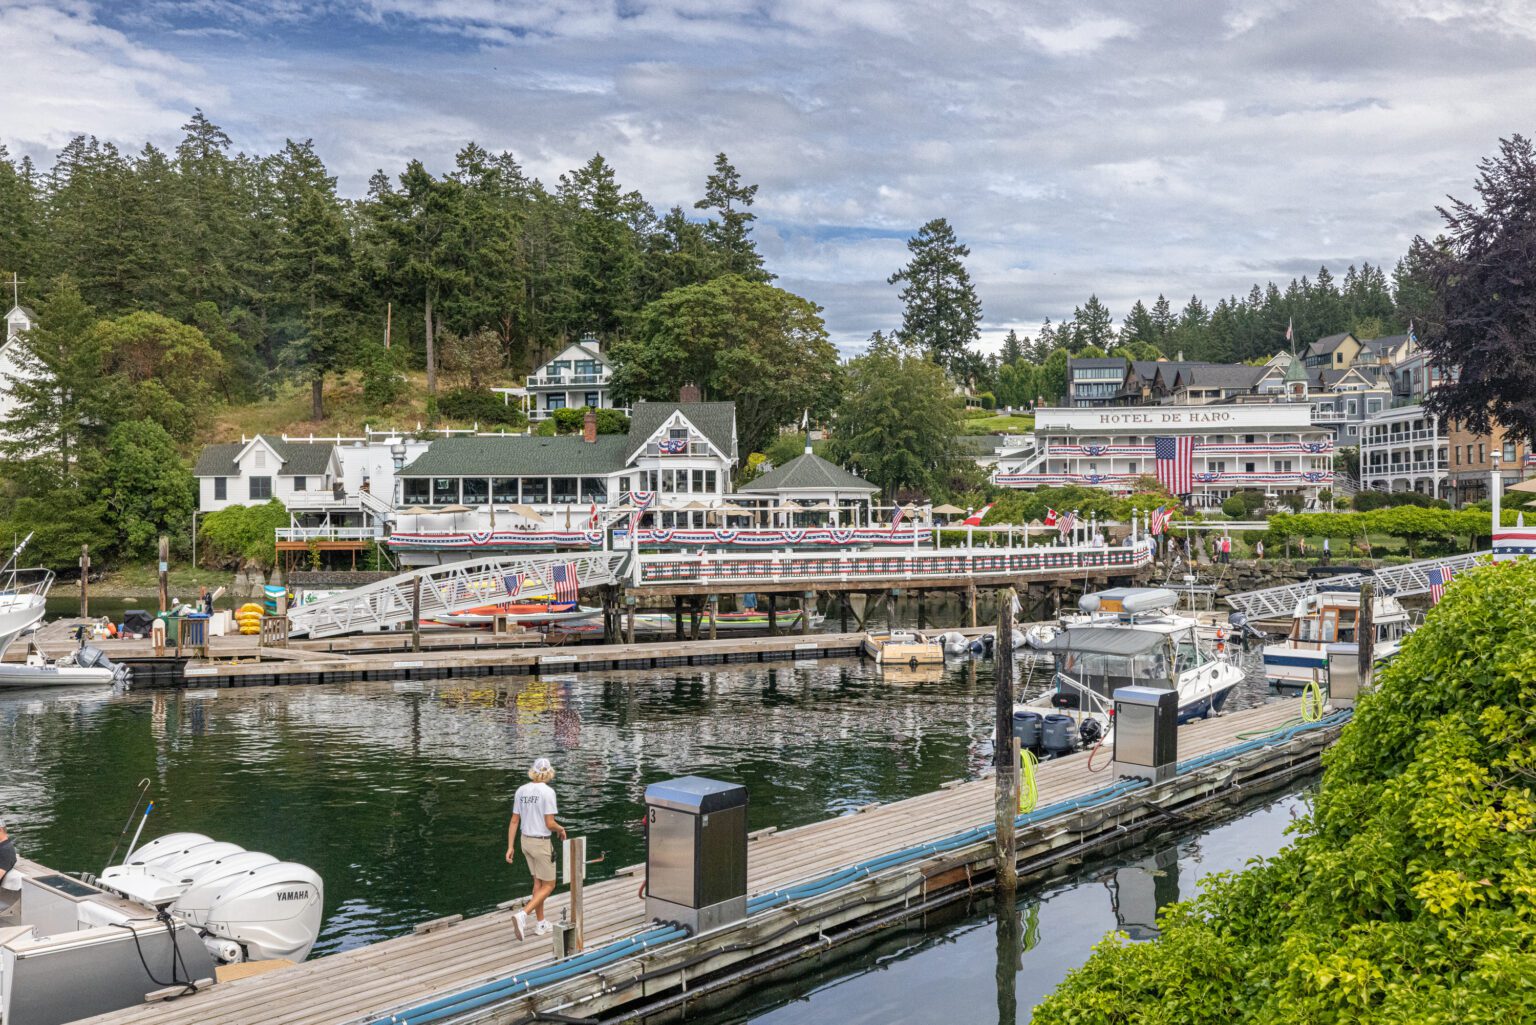 Charming Roche Harbor saw its first Europeans more than 200 years ago. It is now home to a renowned resort and world-class marina.